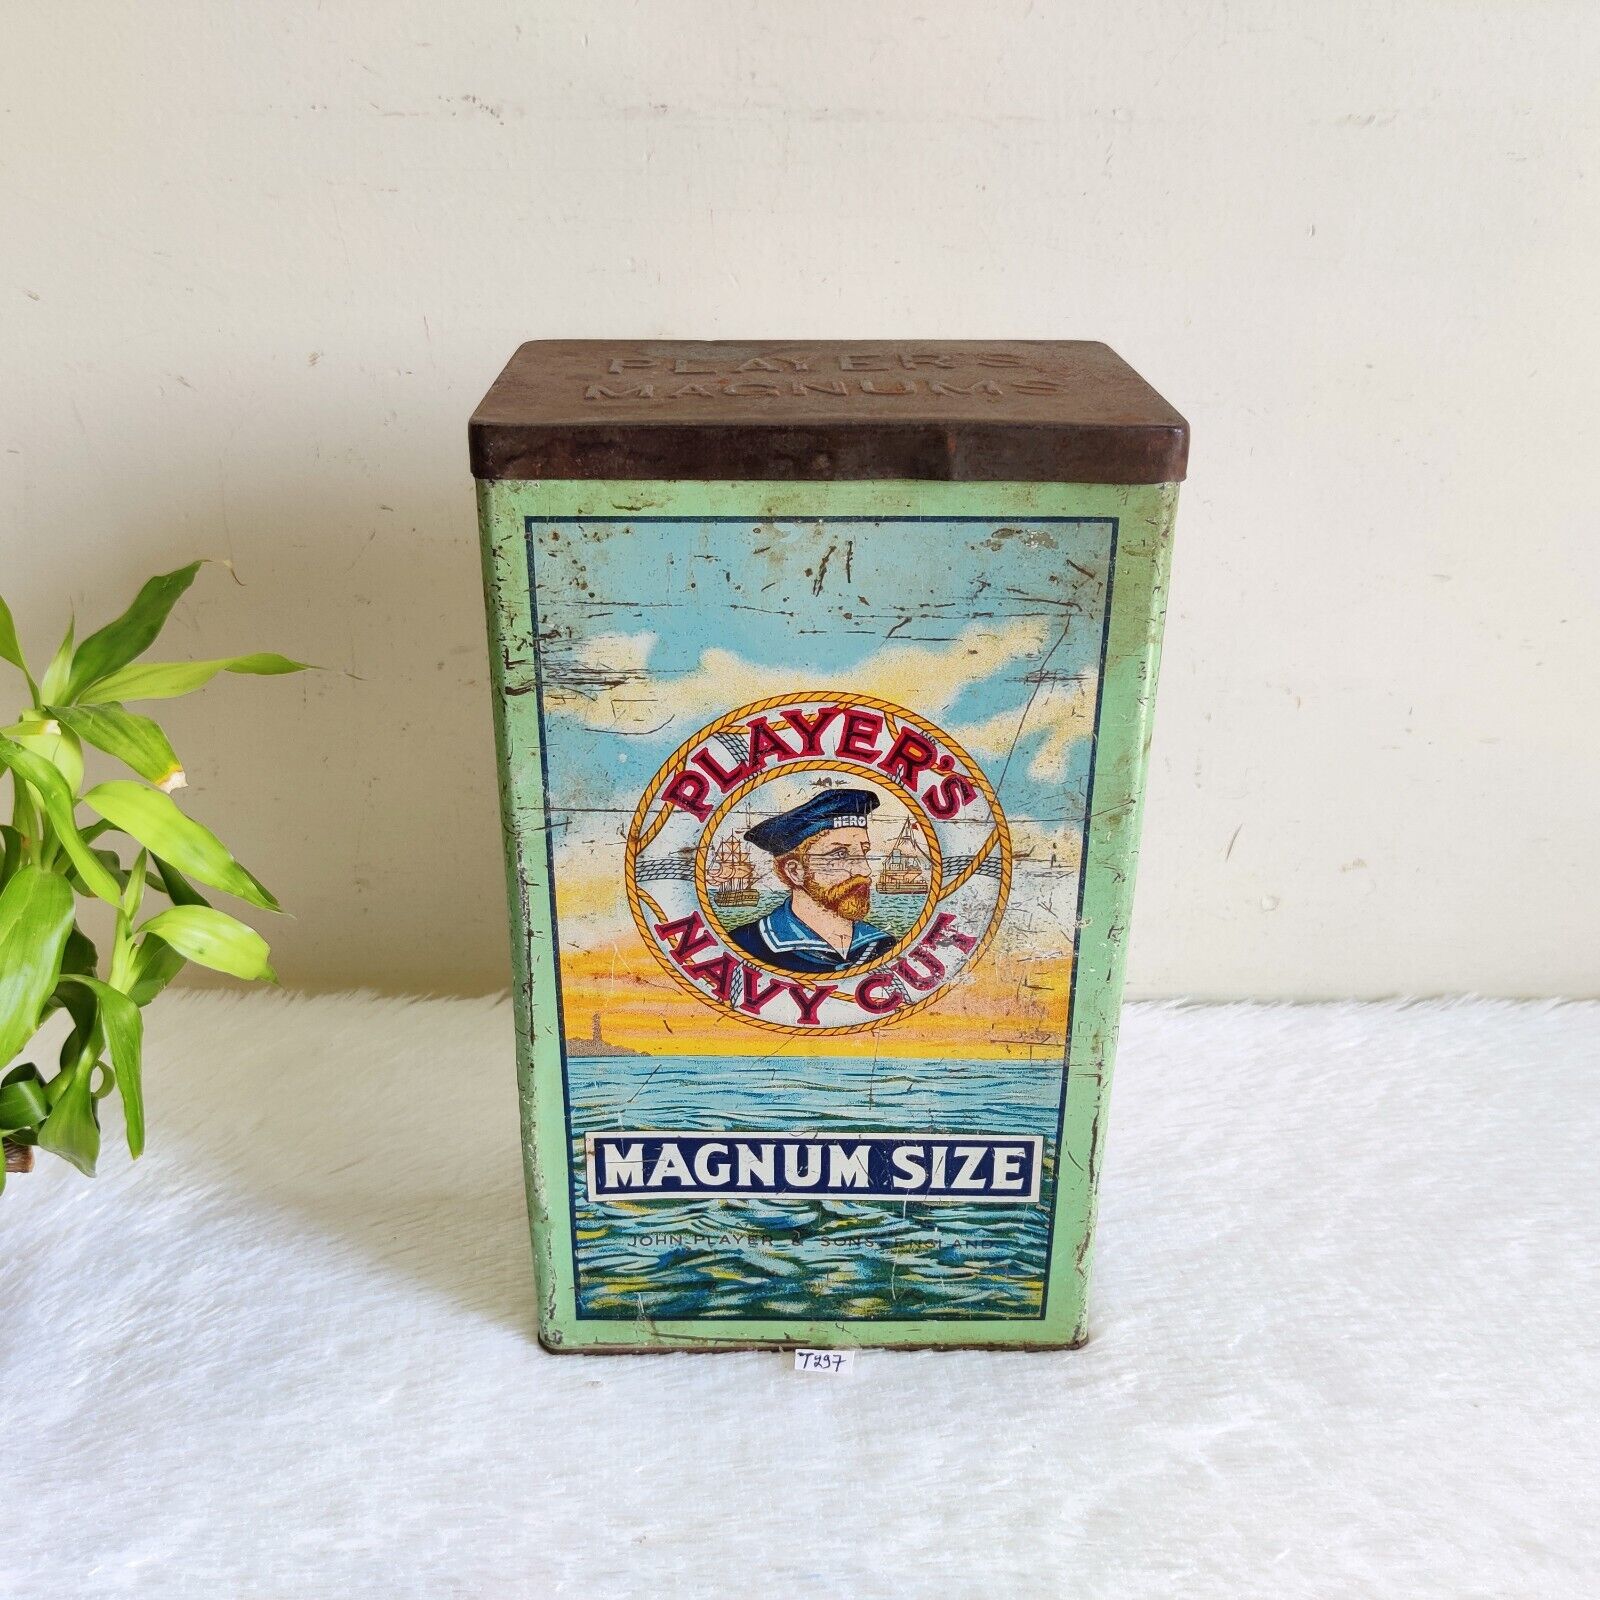 1930s Vintage Players Navy Cut Magnum Size Cigarette Advertising Tin Box CG257